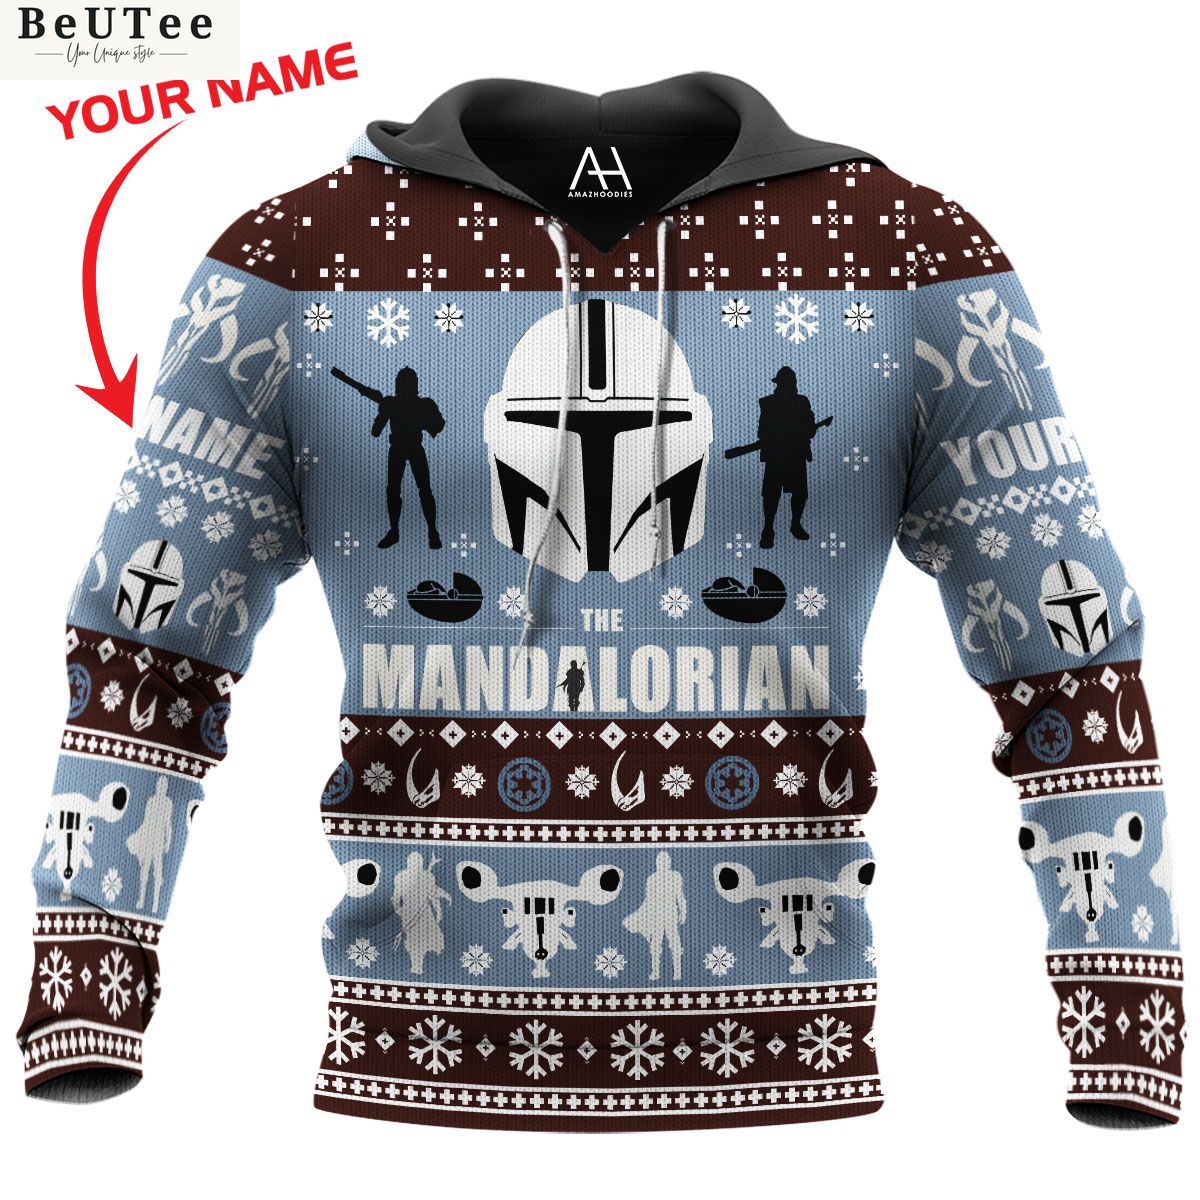 the mandalorian ugly sweater 3d ugly sweater jumper 1 8GjIg.jpg